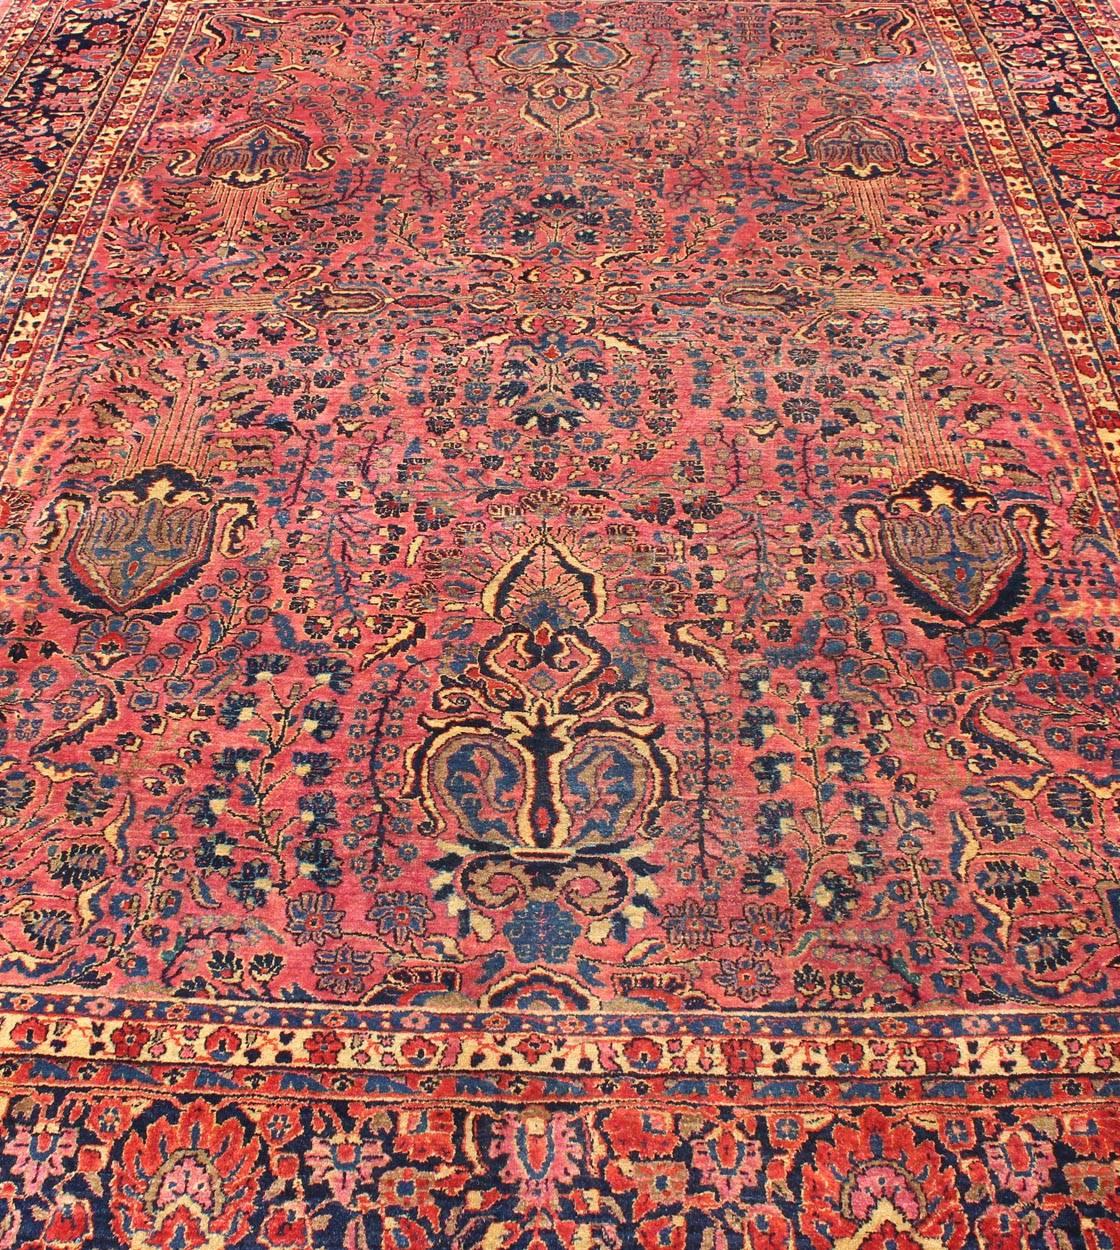 Antique Persian Sarouk Carpet with Deep Cranberry Field and Floral Elements 4